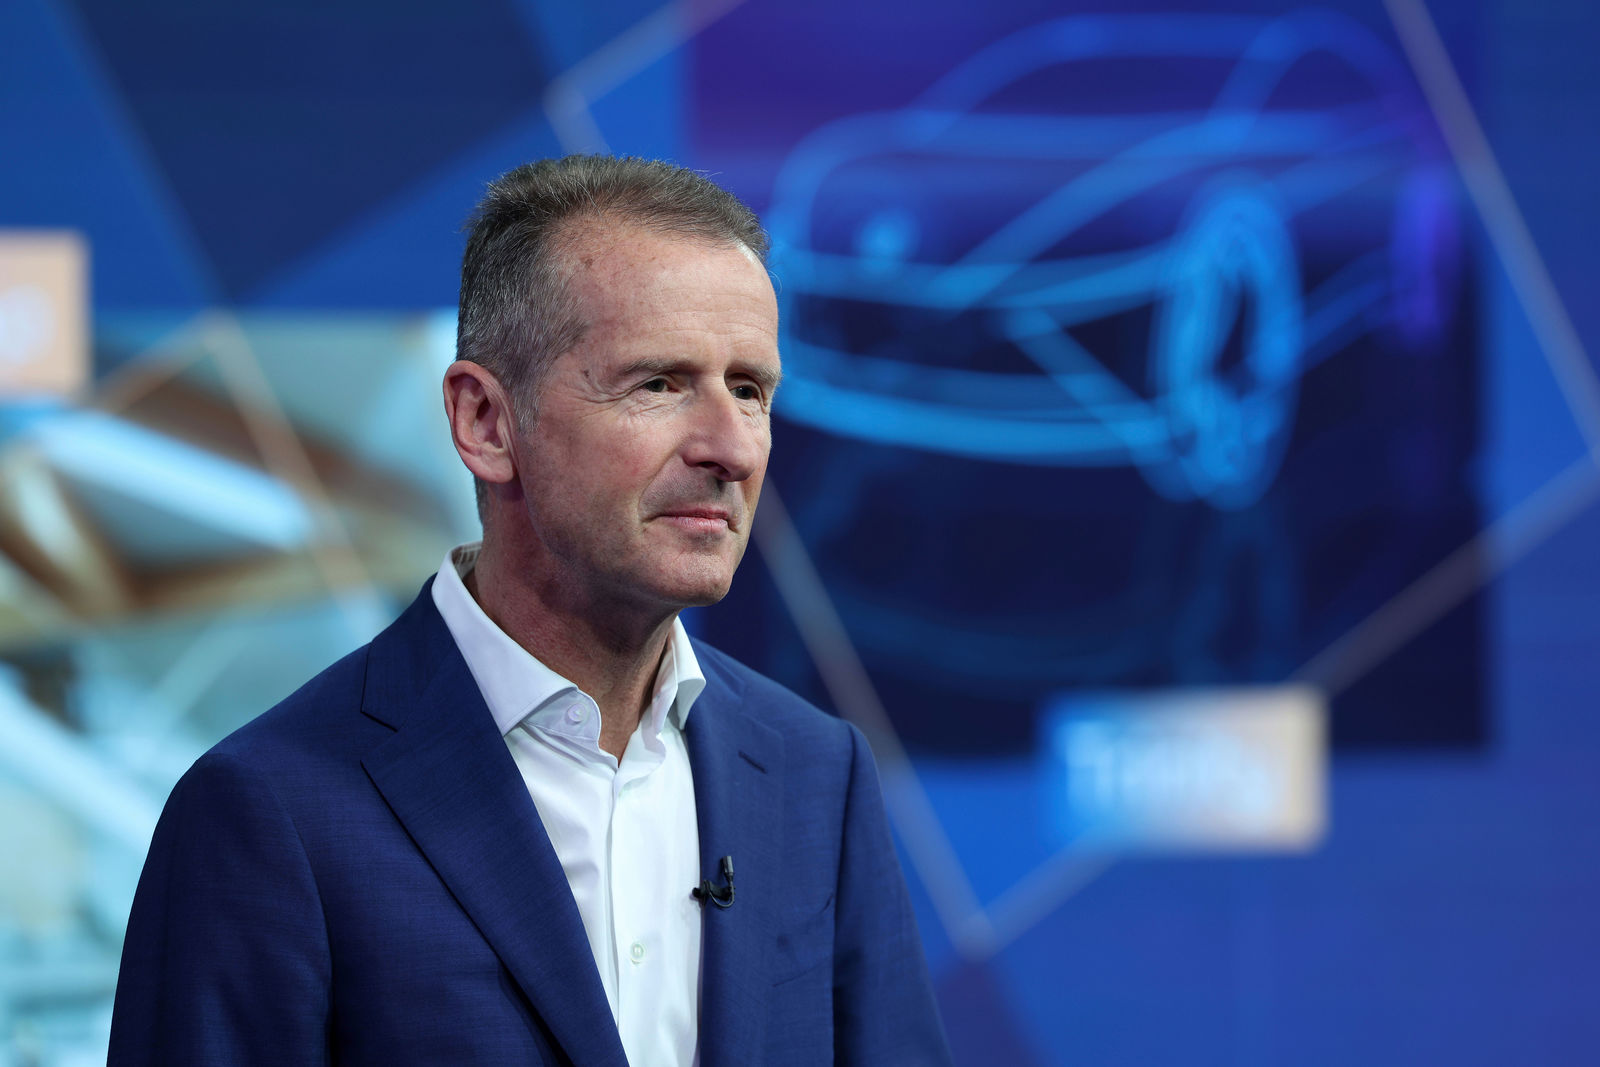 Volkswagen Group annual media conference 2022